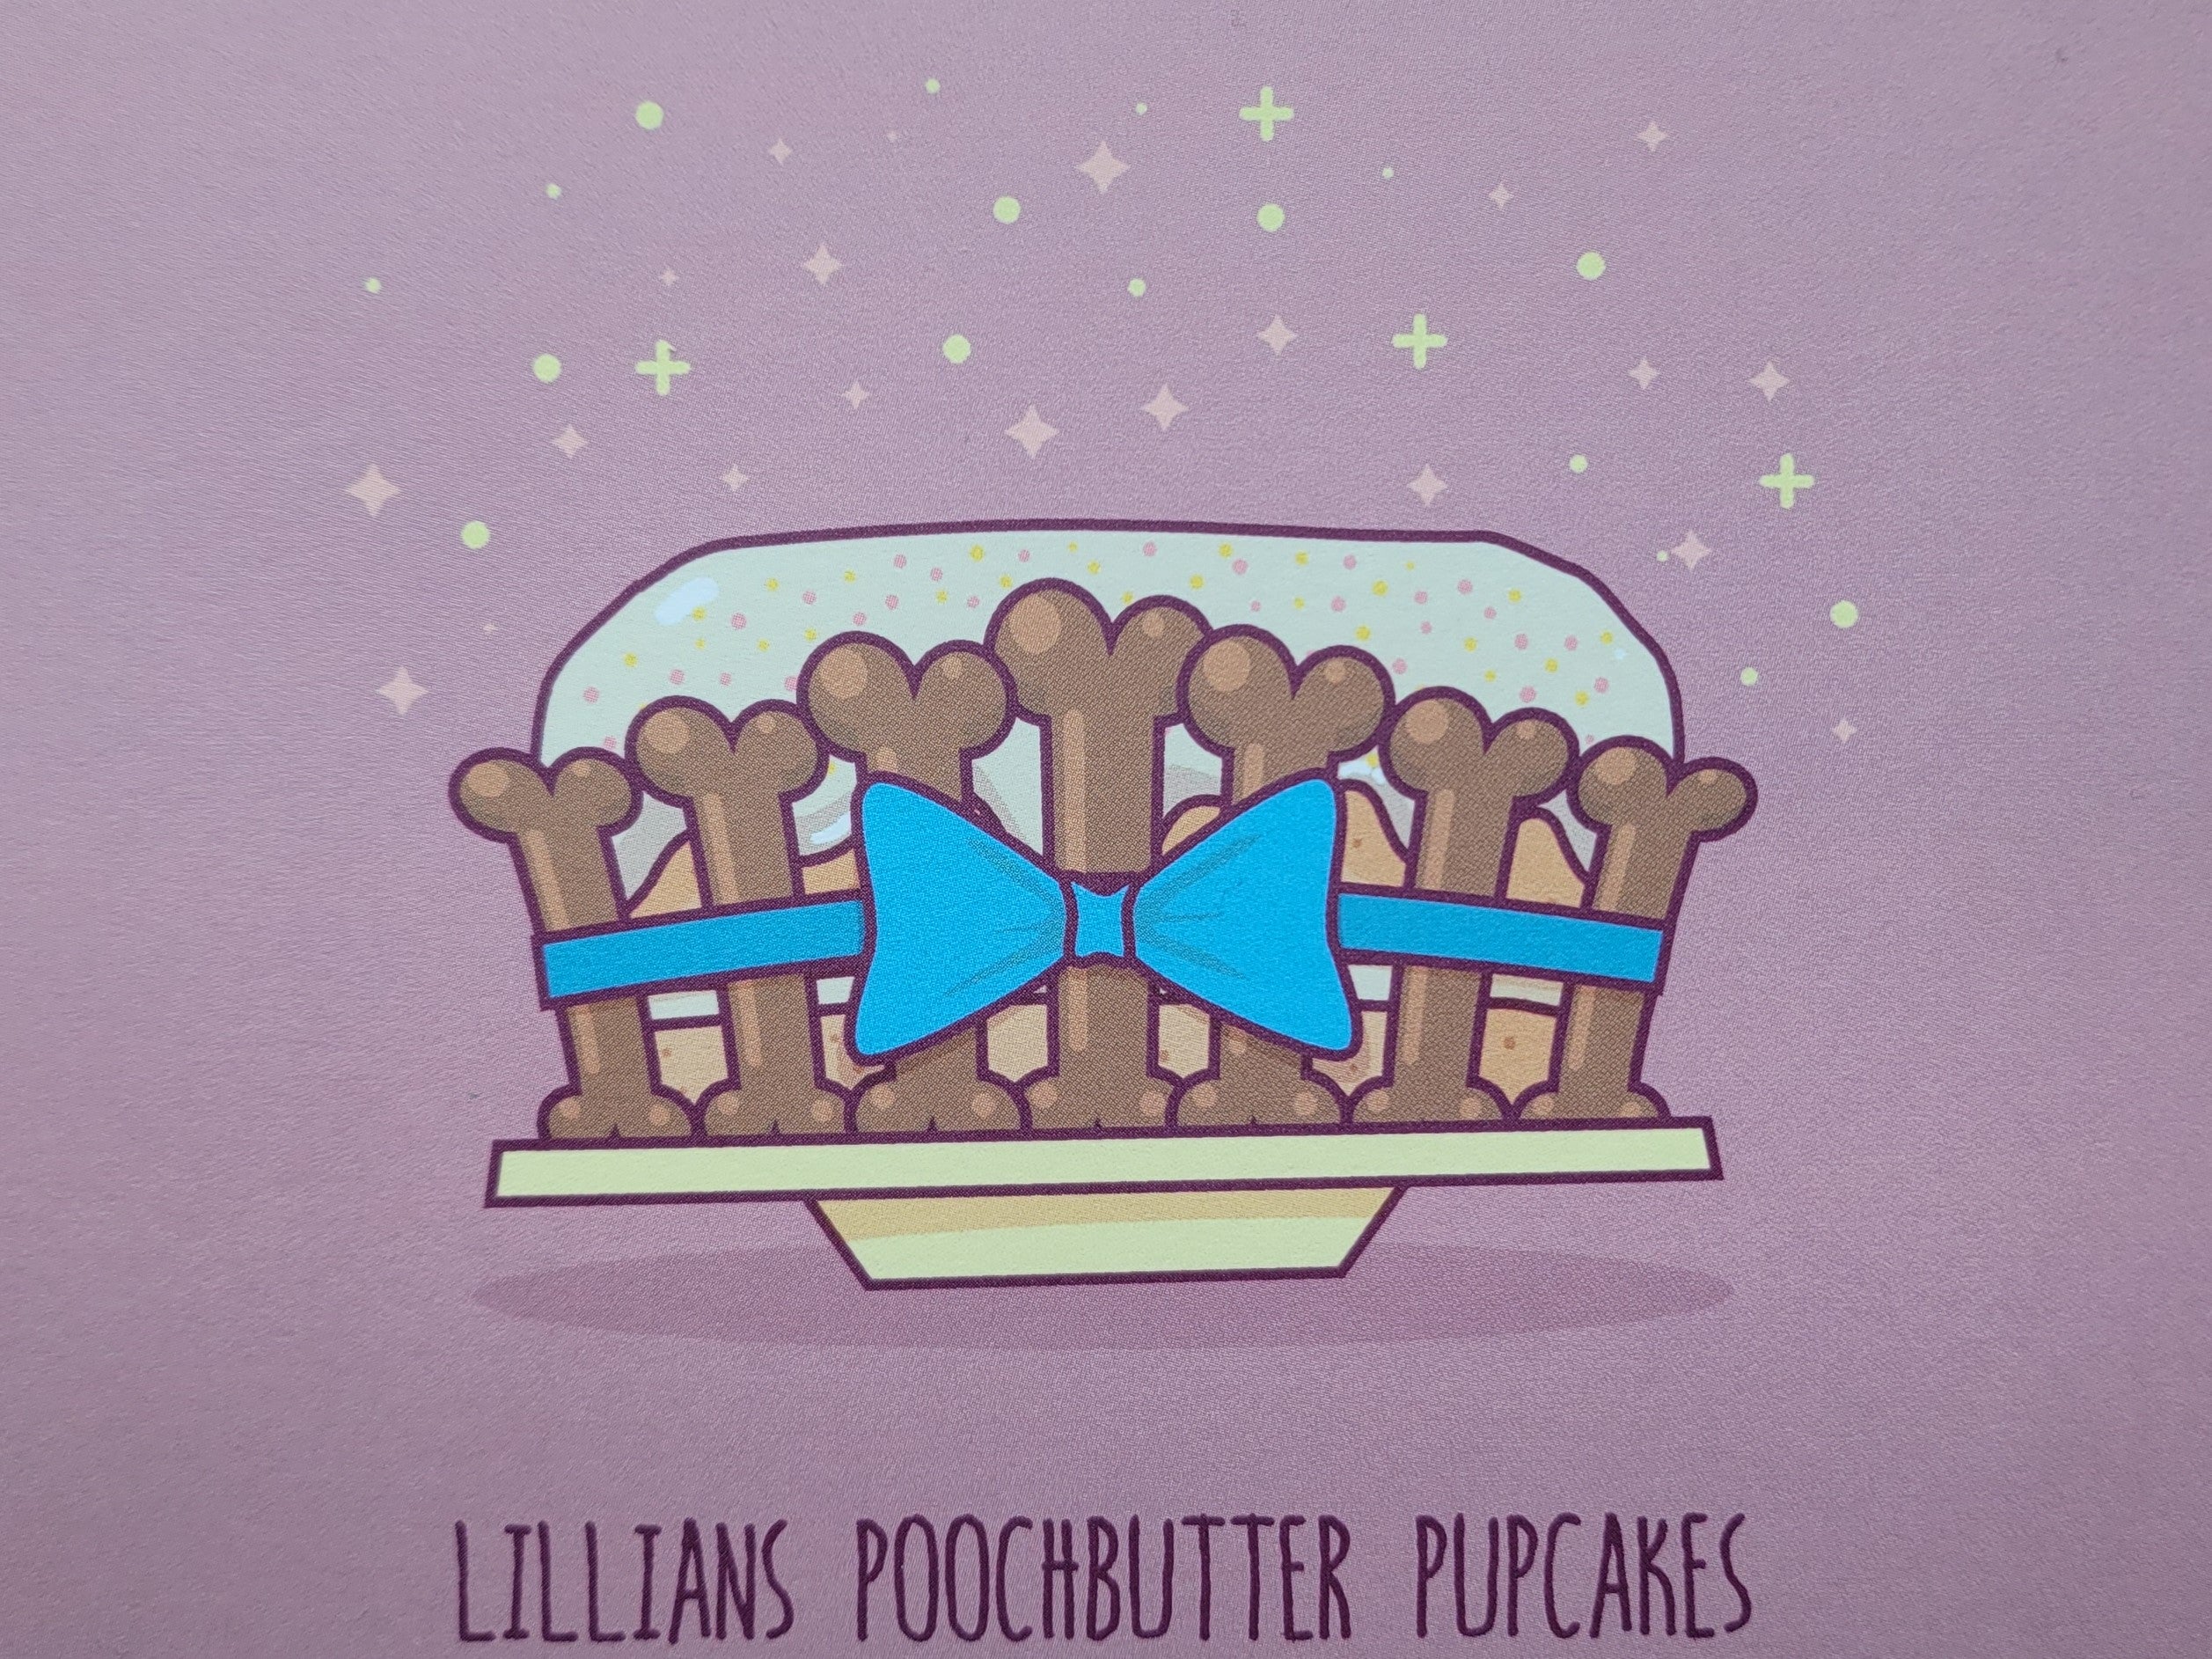 Peanut Butter Recipes for Dogs - Lillians Poochbutter Pupcakes